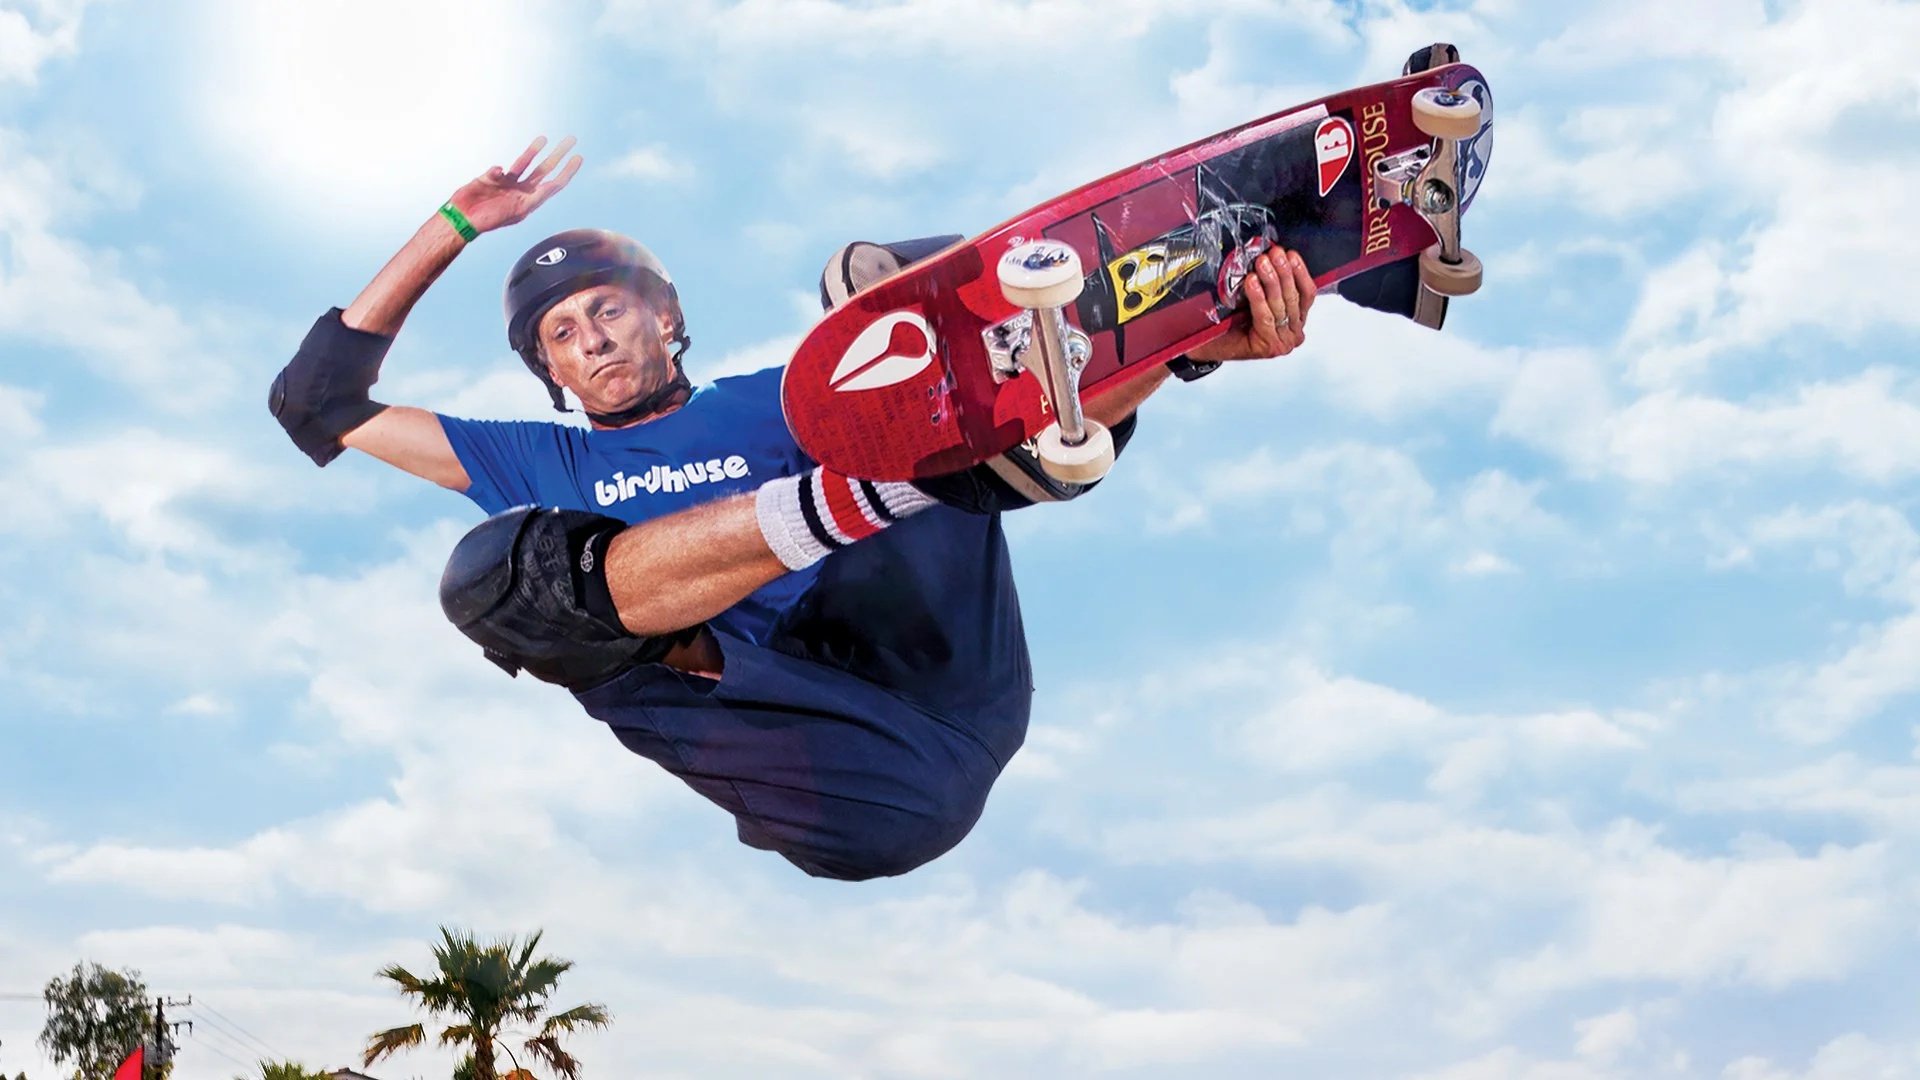 Evidence of a New Tony Hawk's Pro Skater Game Continues to Surface